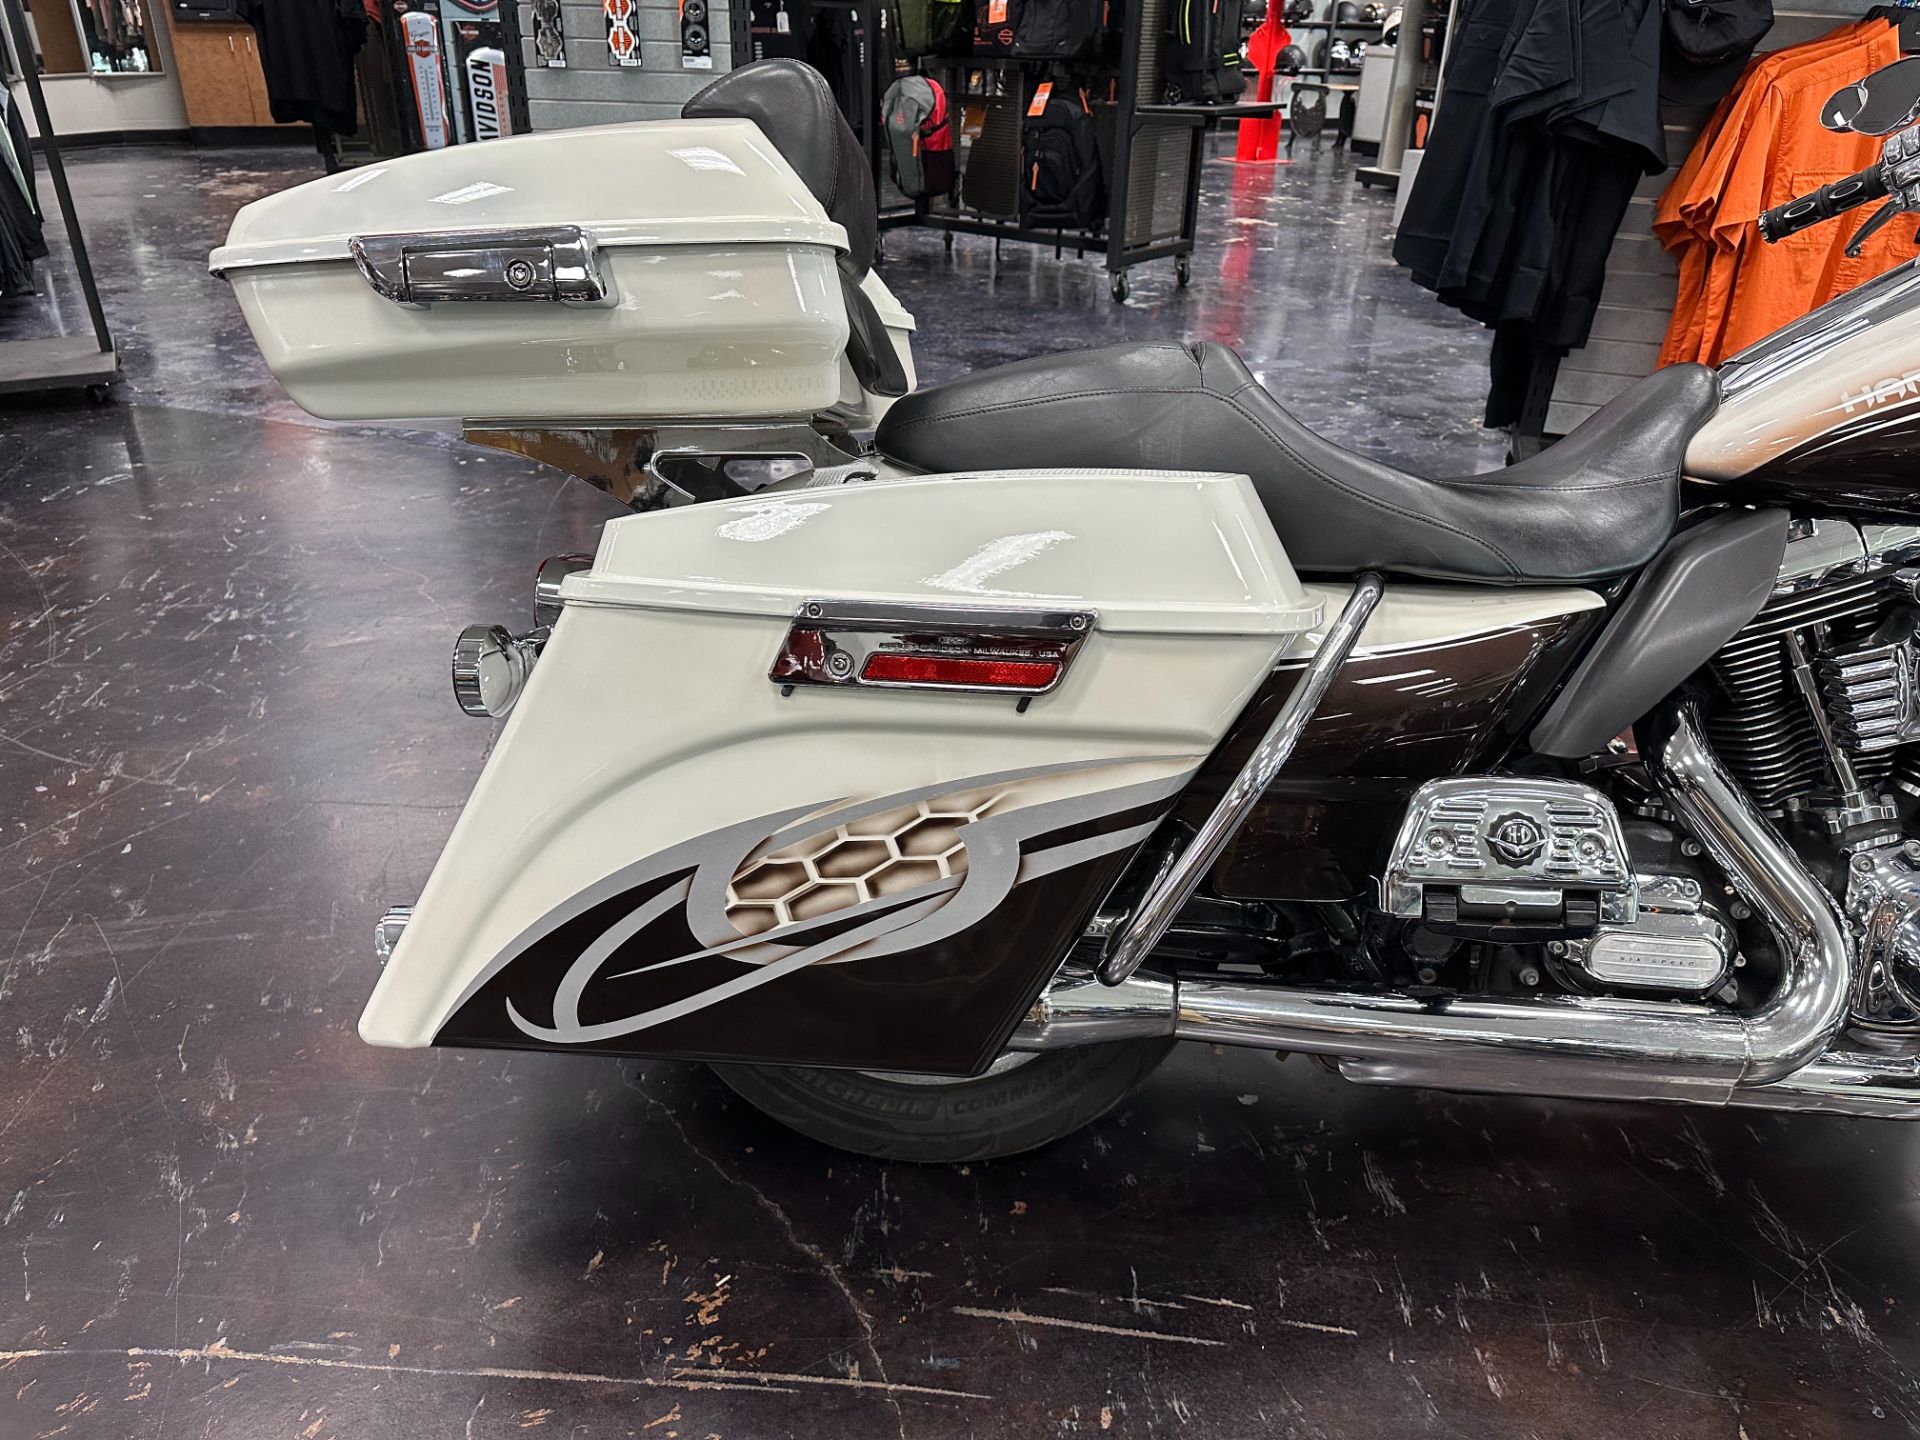 2011 Harley-Davidson Electra Glide® Ultra Limited in Metairie, Louisiana - Photo 8